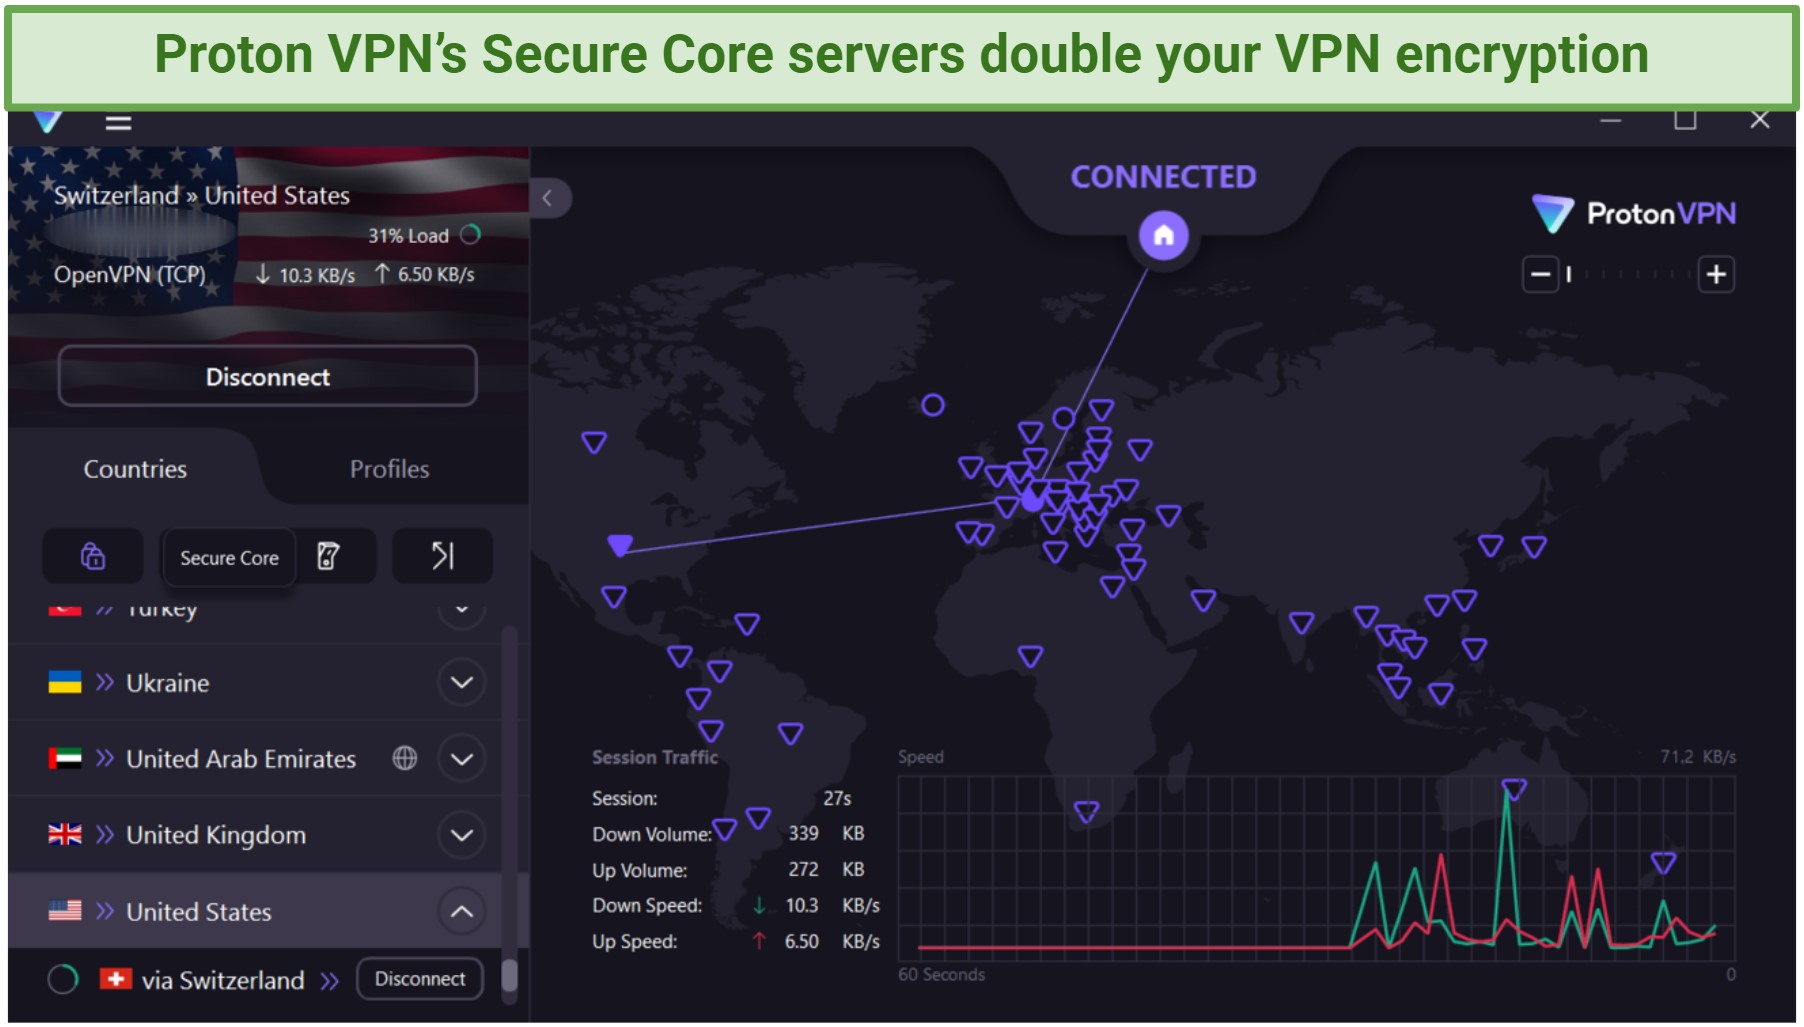 Screenshot of the Proton VPN app showing its Secure Core servers